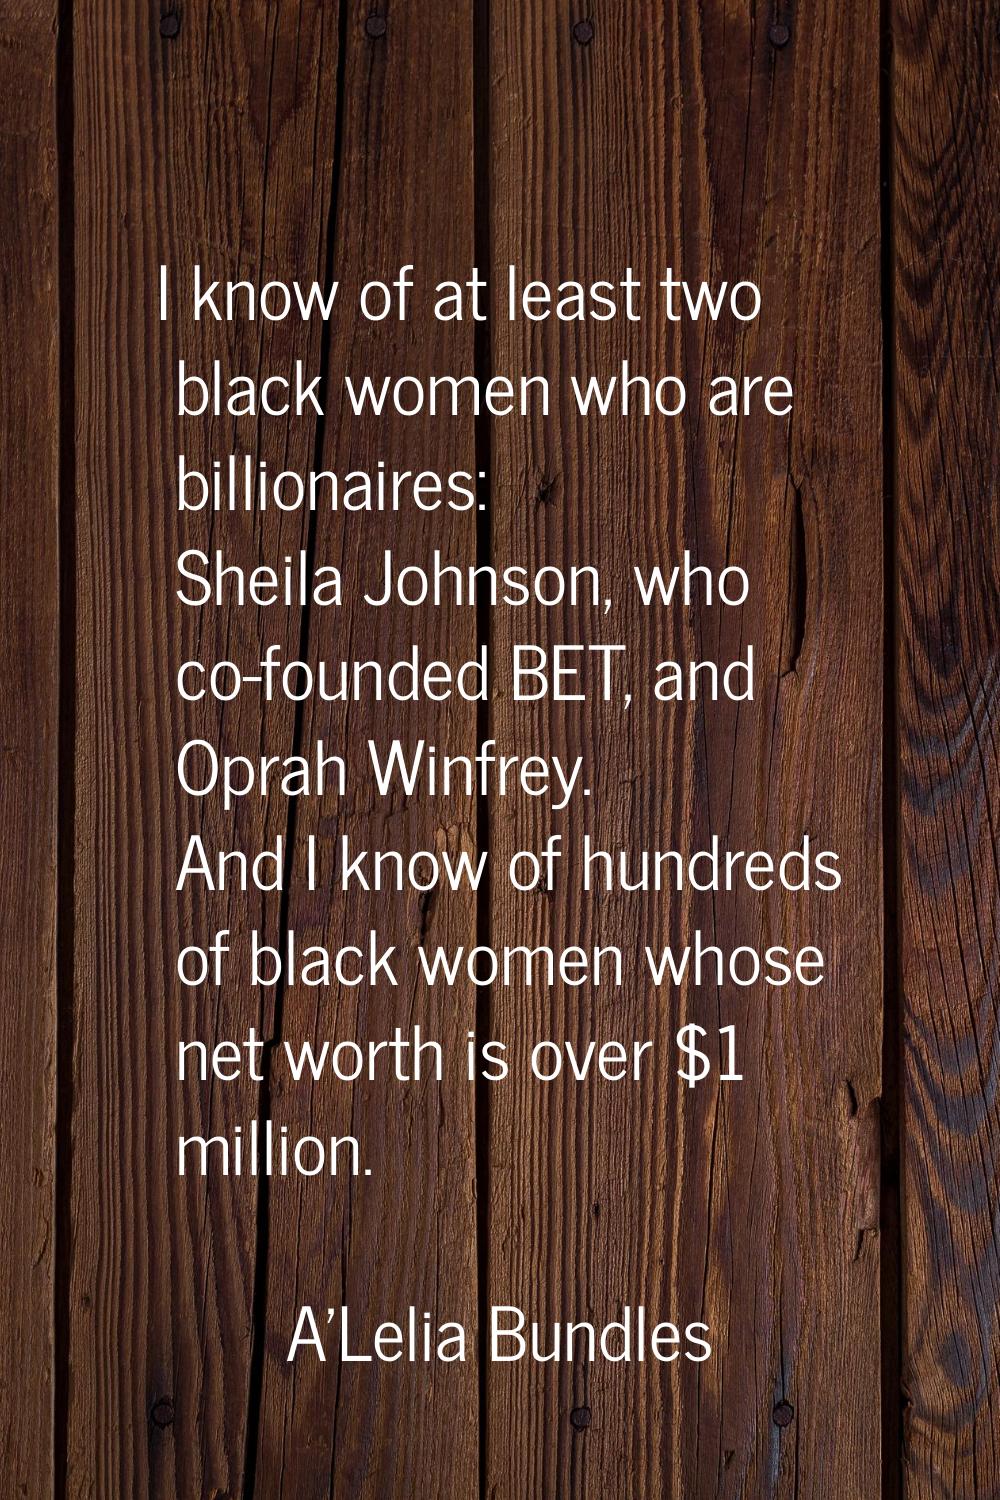 I know of at least two black women who are billionaires: Sheila Johnson, who co-founded BET, and Op